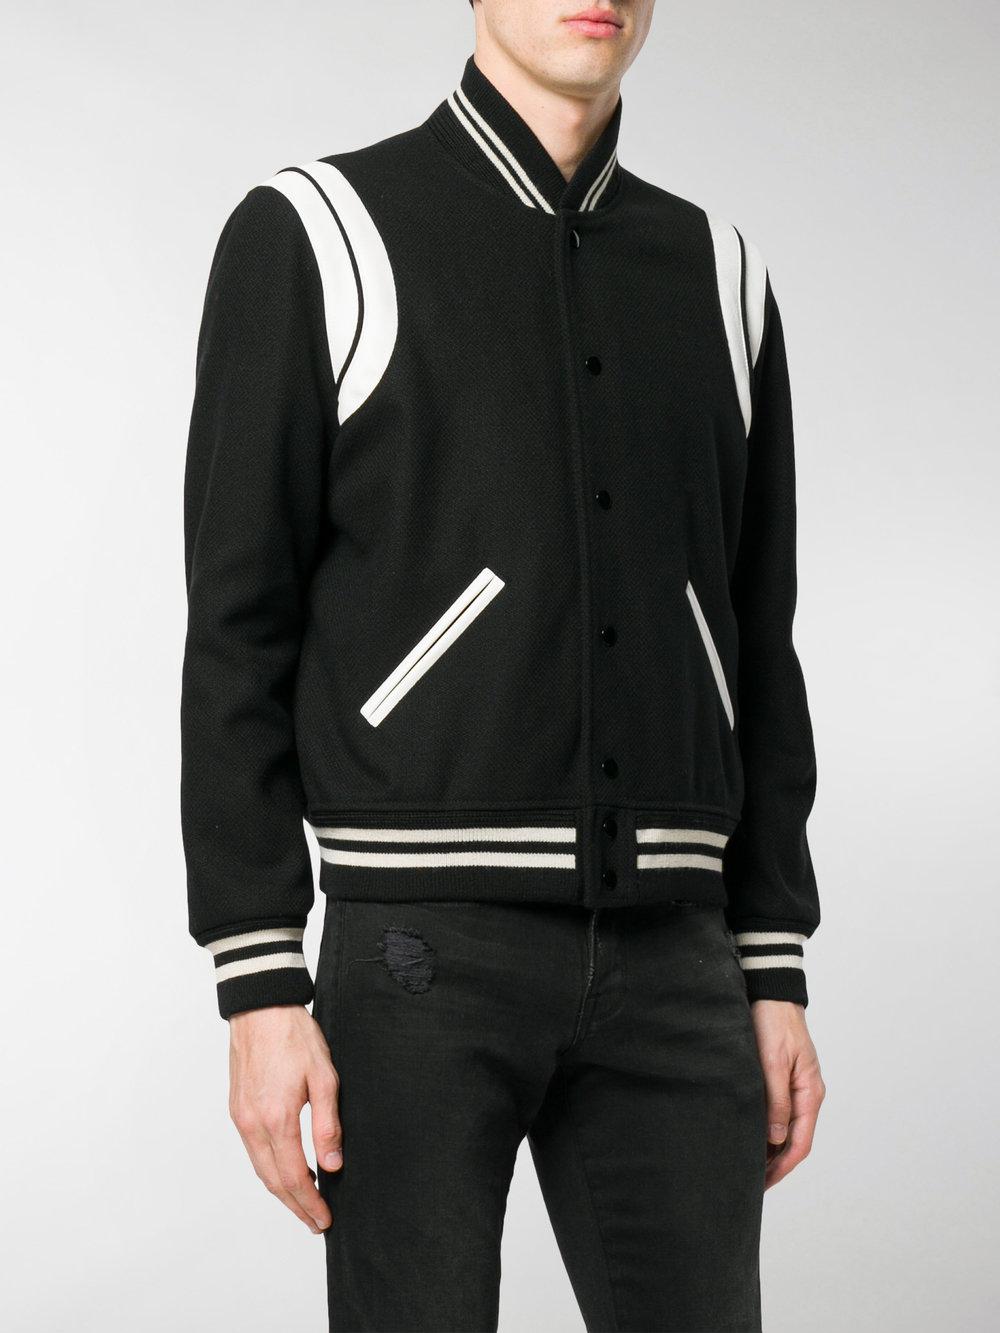 Saint Laurent Wool Classic Teddy Jacket in Black for Men - Save 22% - Lyst